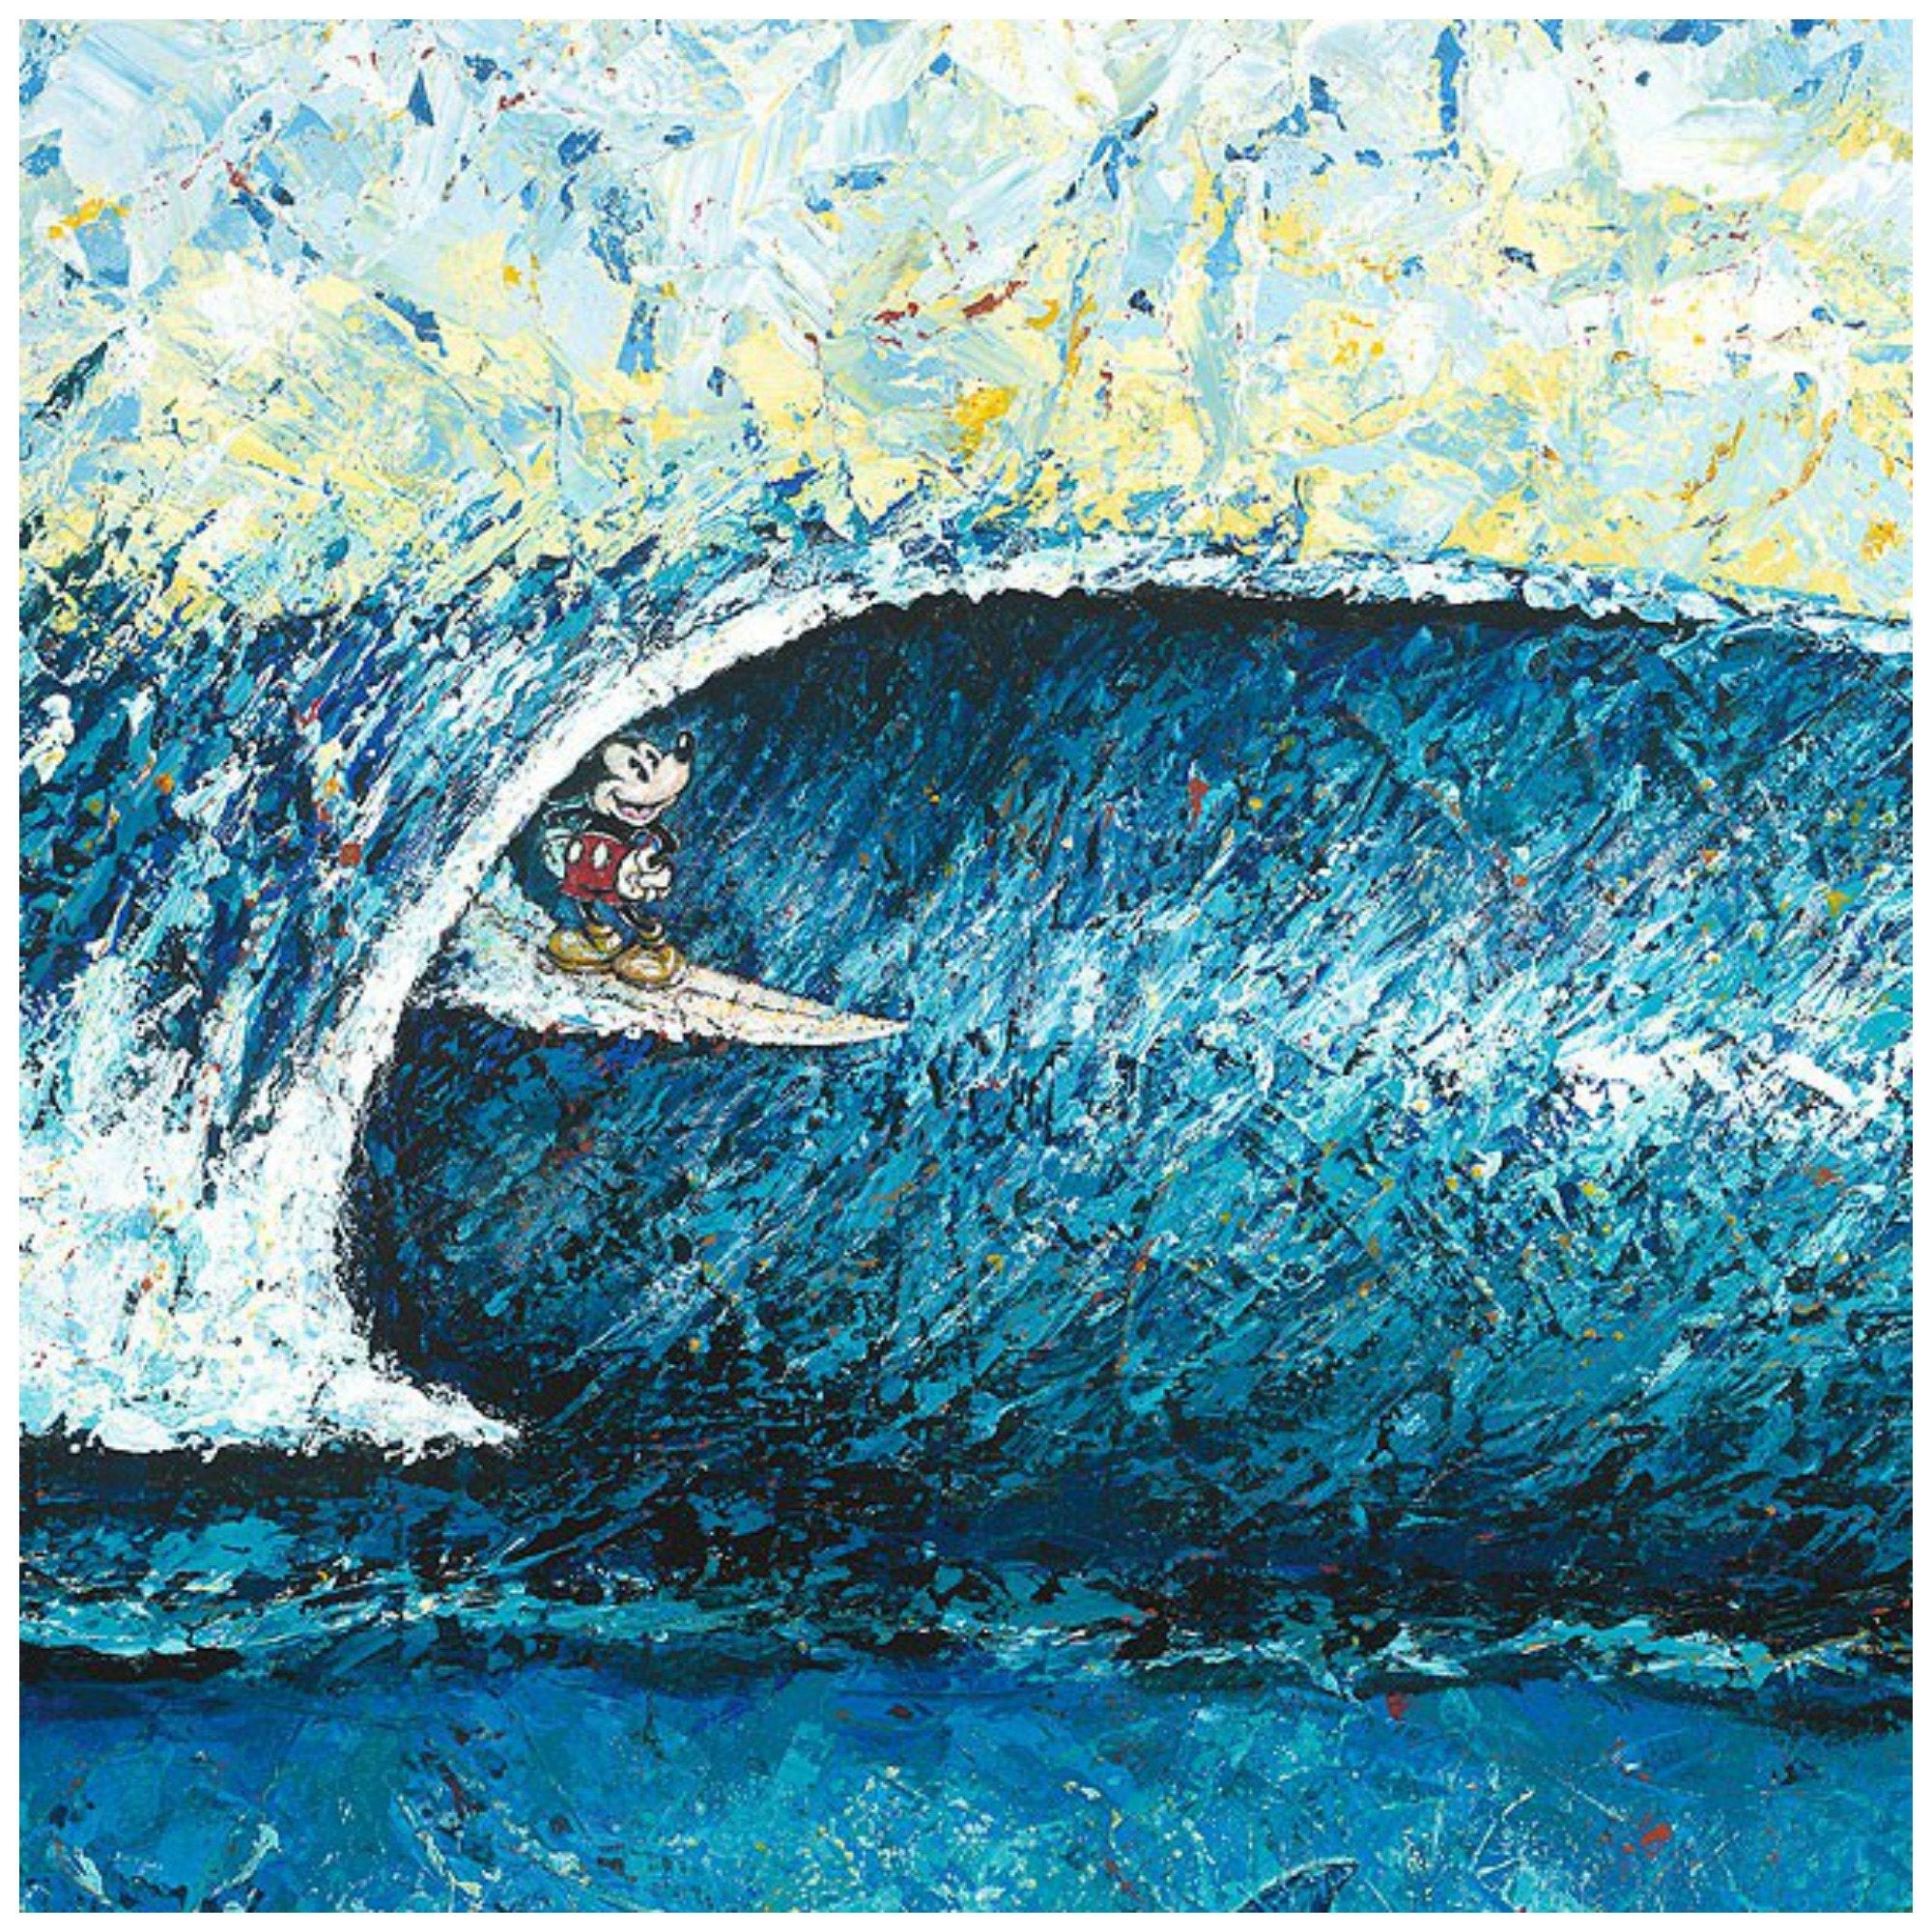  Mickeys Surfs Pipeline by Trevor Mezak.  Mickey surfing the waves above, as a pair of dolphins swim along below - closeup